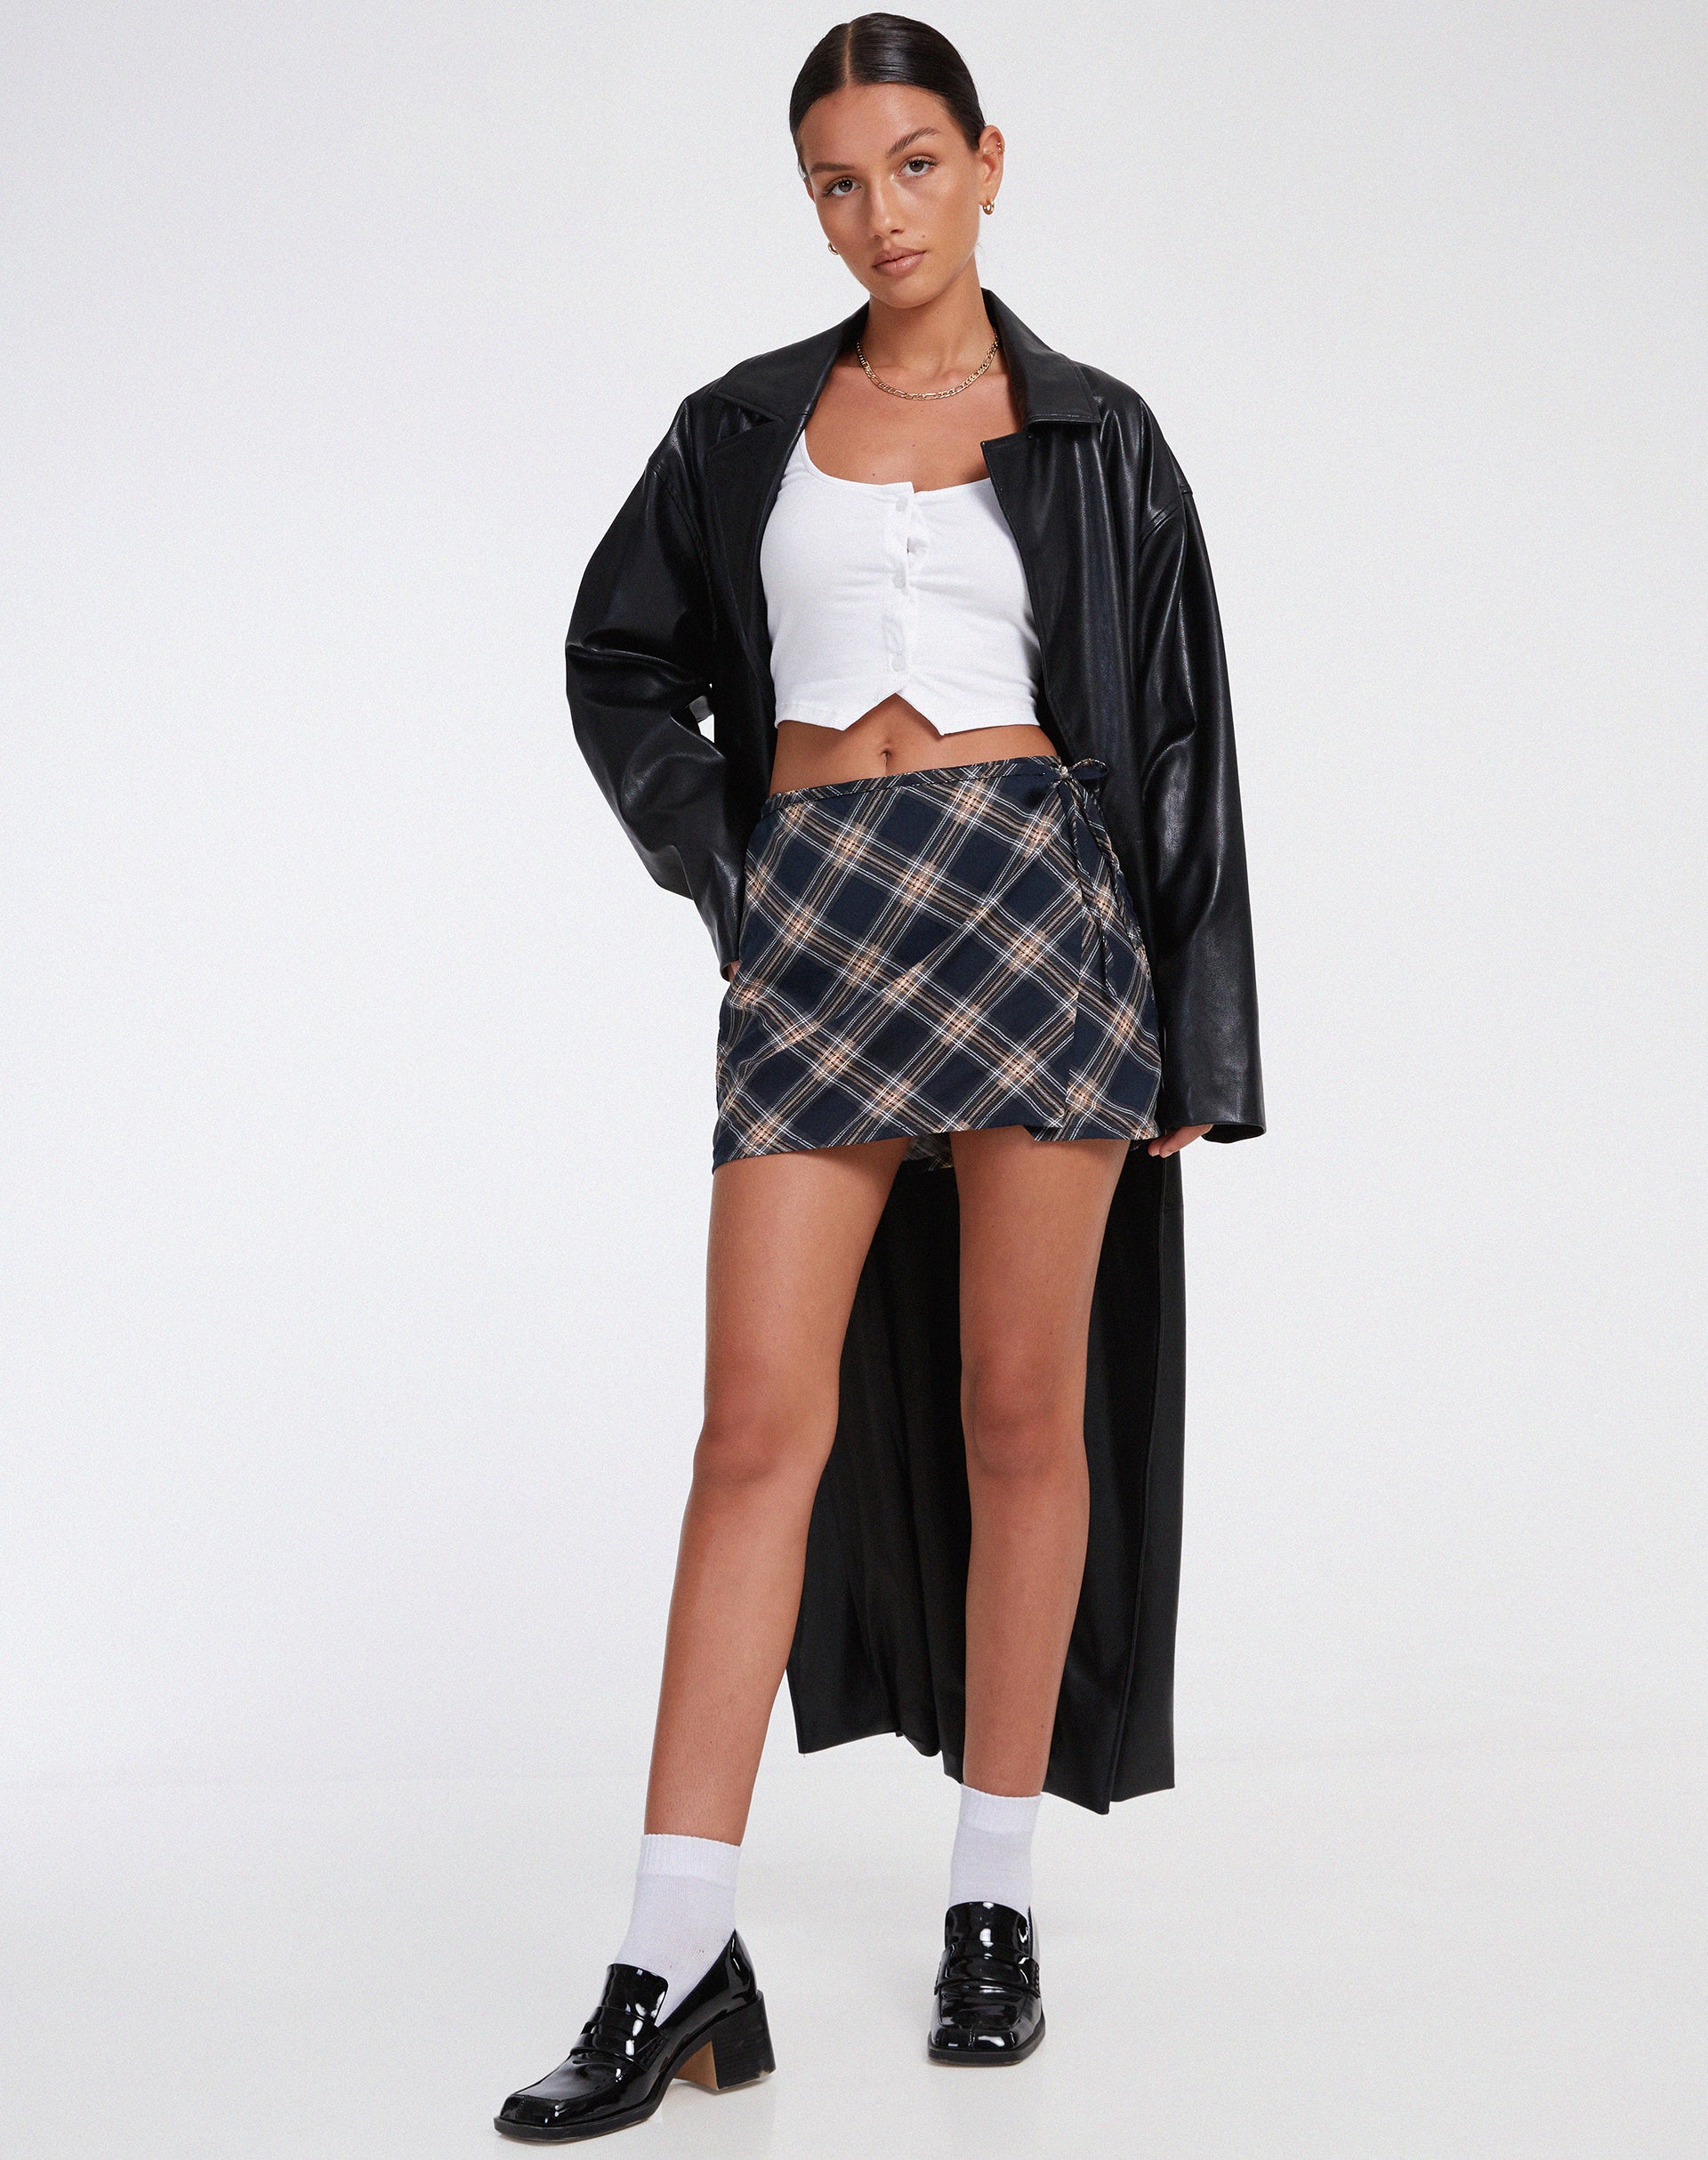 image of Volta Mini Skirt in 20's Check Black and Grey